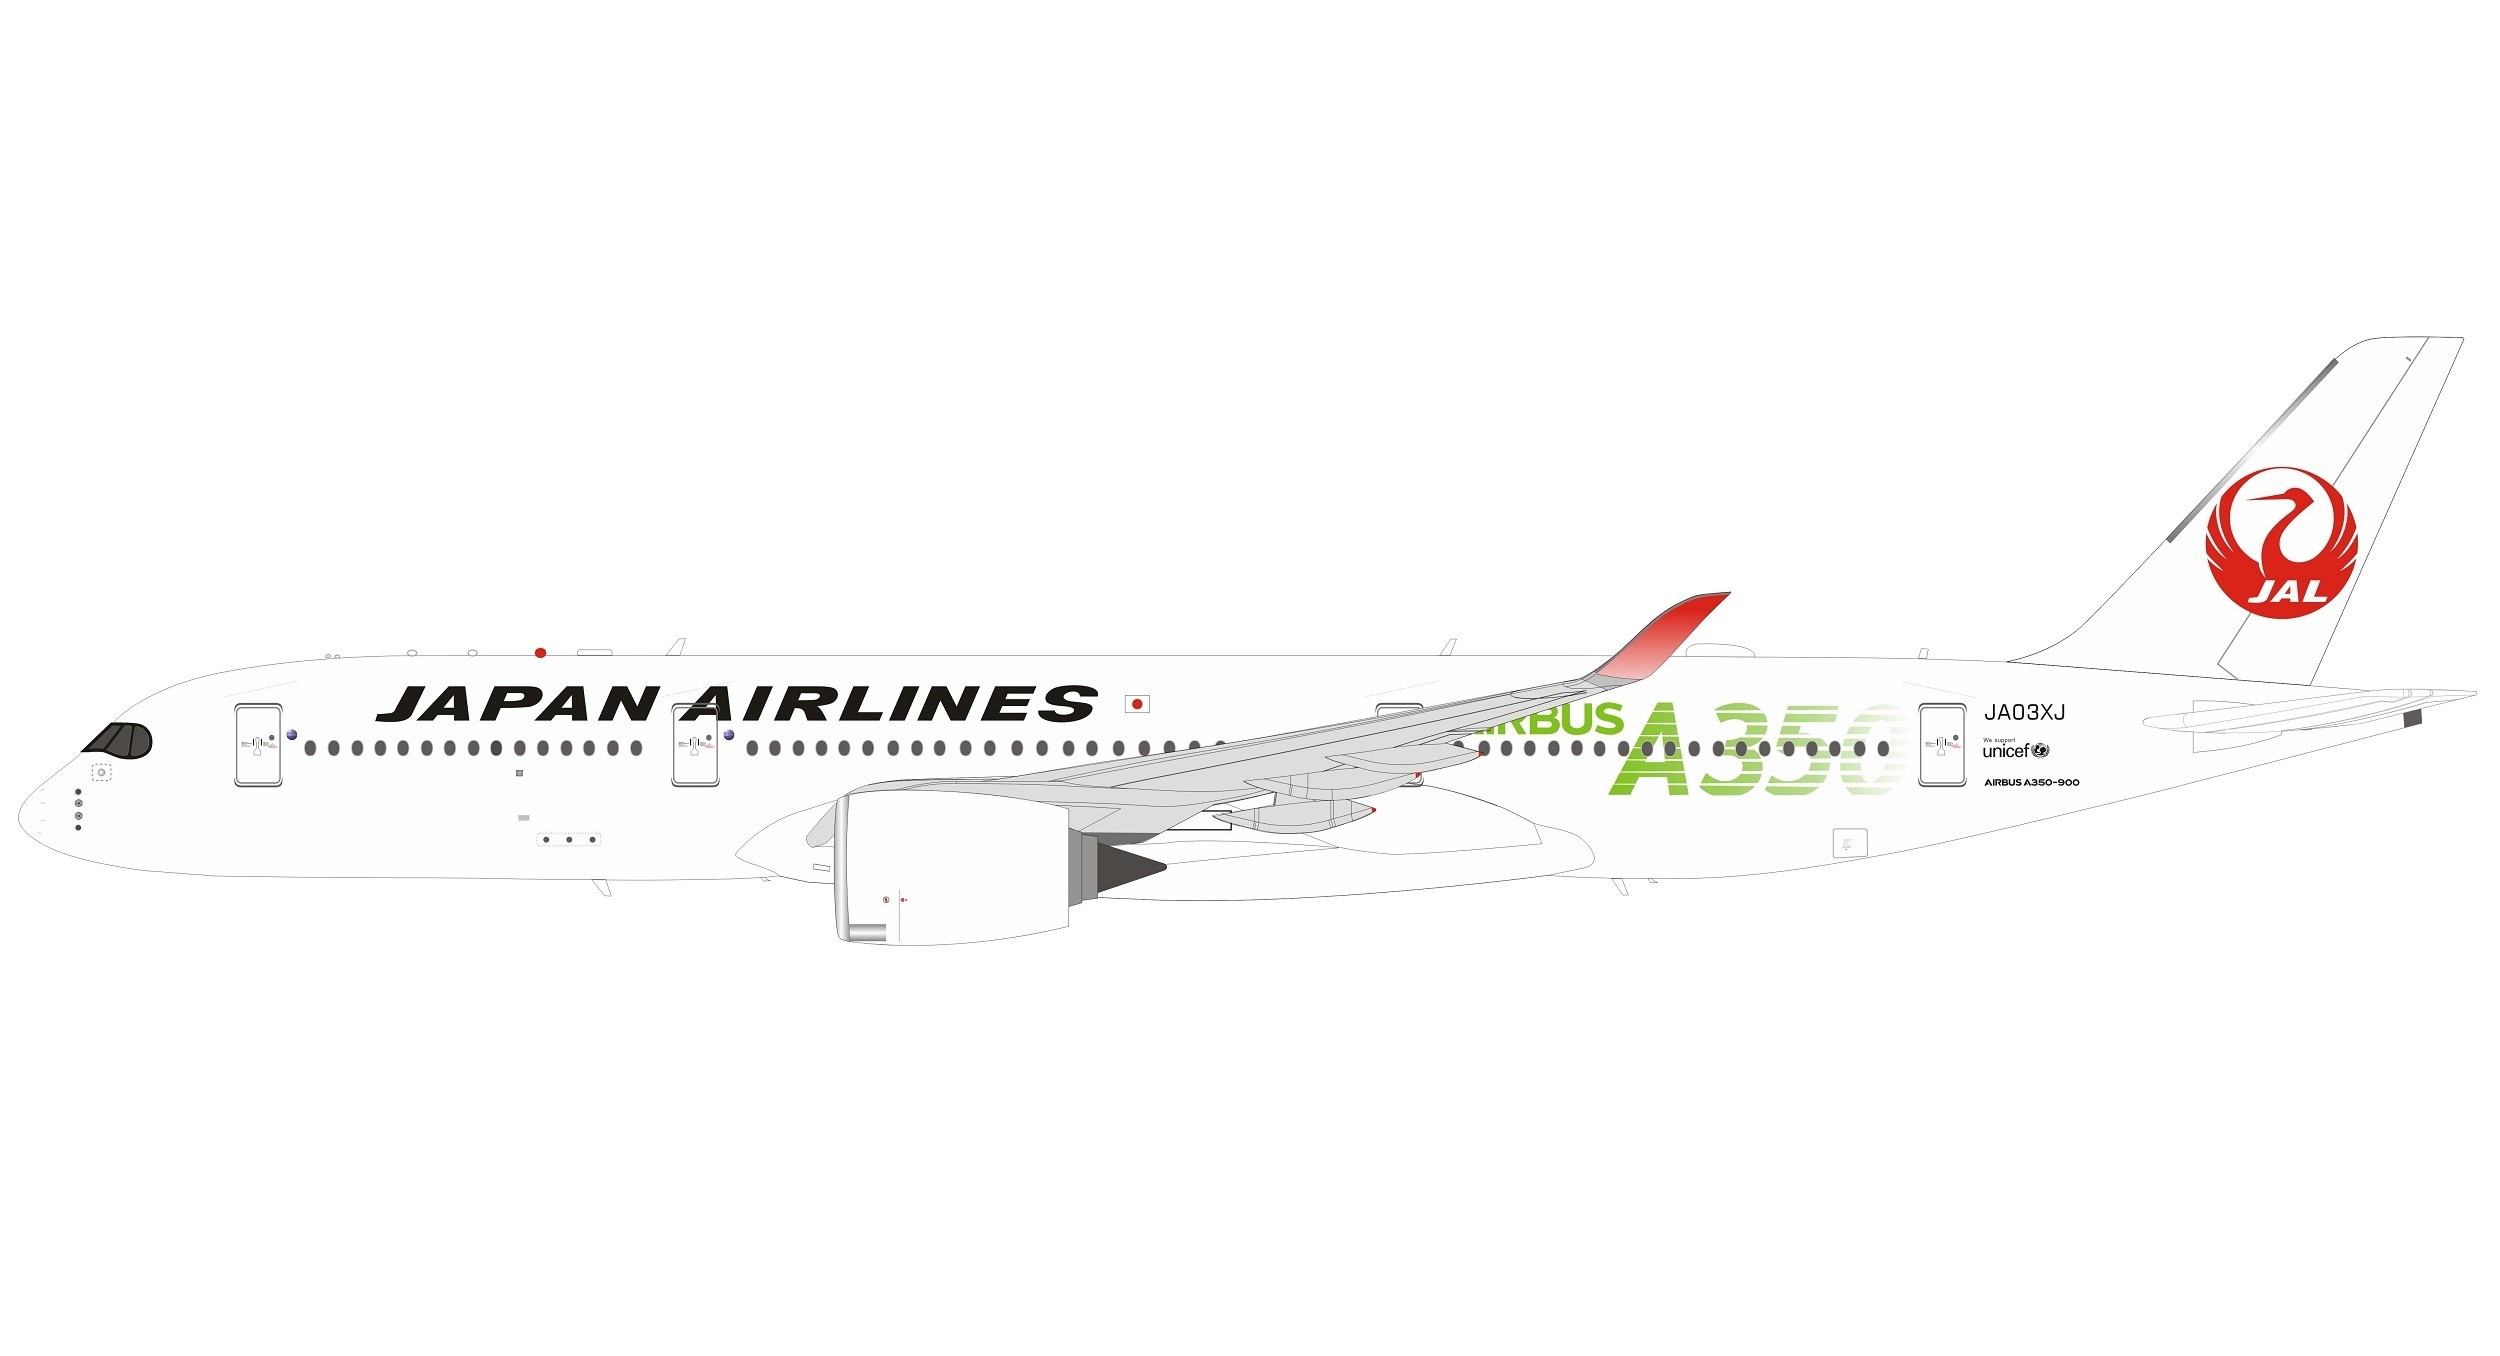 Details about   INFLIGHT 200 B350JA03 1/200 JAPAN AIRLINES AIRBUS A350-900 JA03XJ GREEN W/STAND